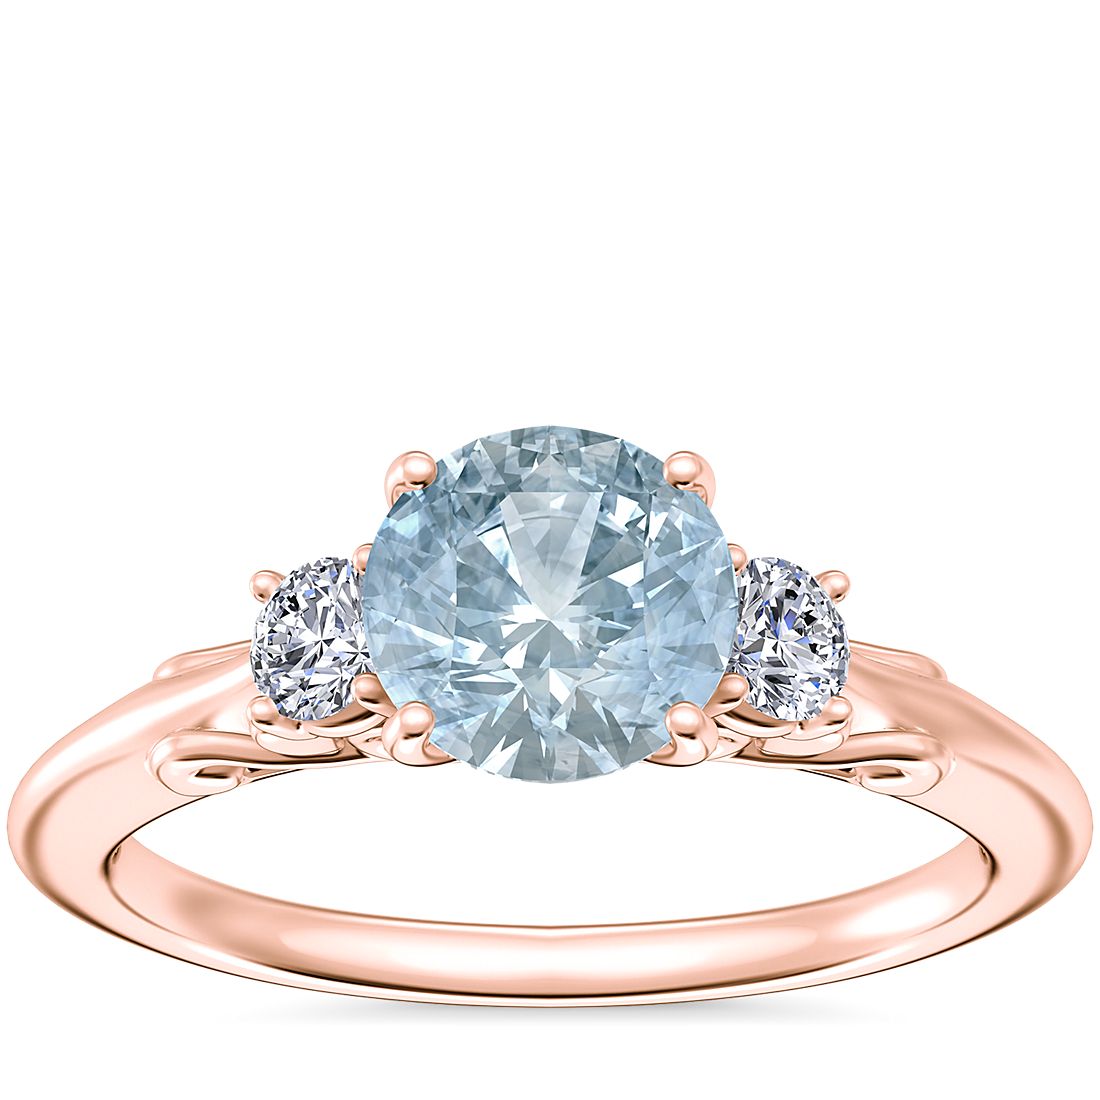 Vintage Three Stone Engagement Ring with Round Aquamarine in 14k Rose Gold (6.5mm)